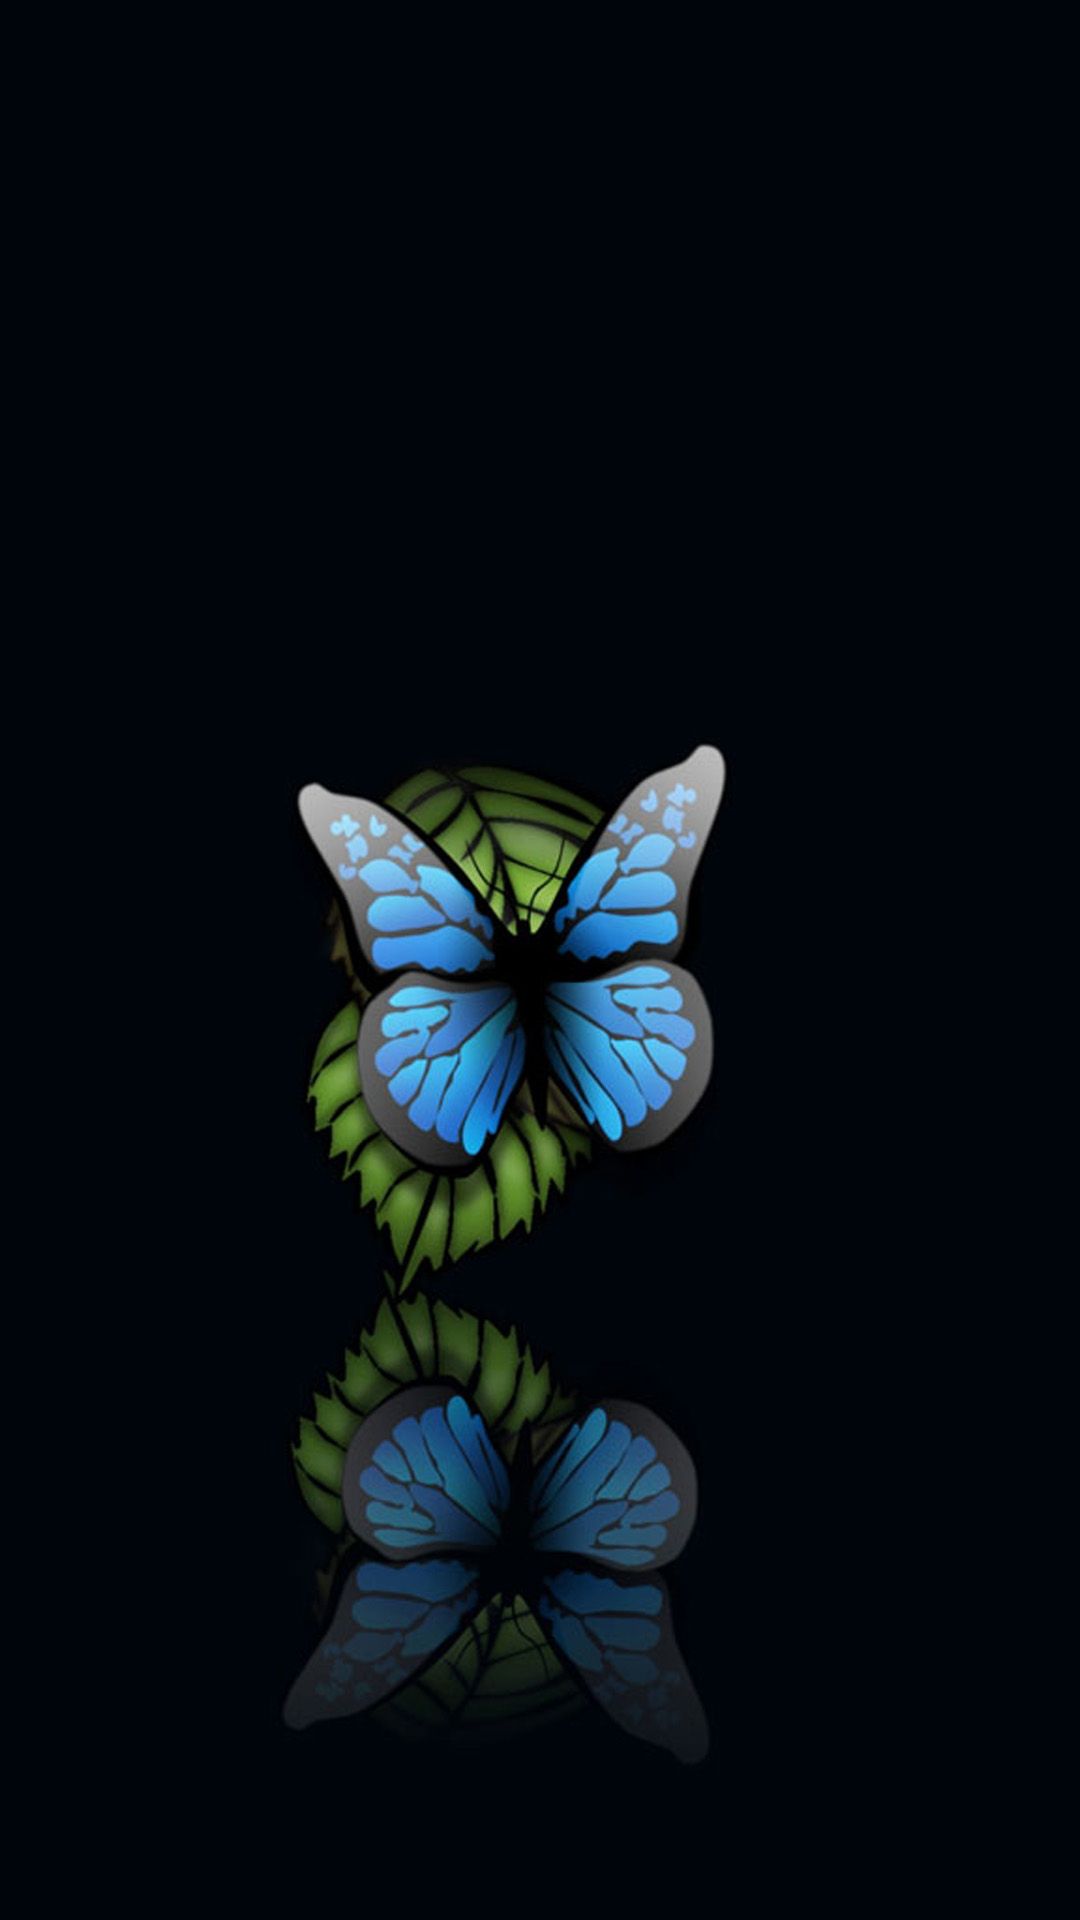 Mystical Butterfly Wallpaper Free Mystical Butterfly Background